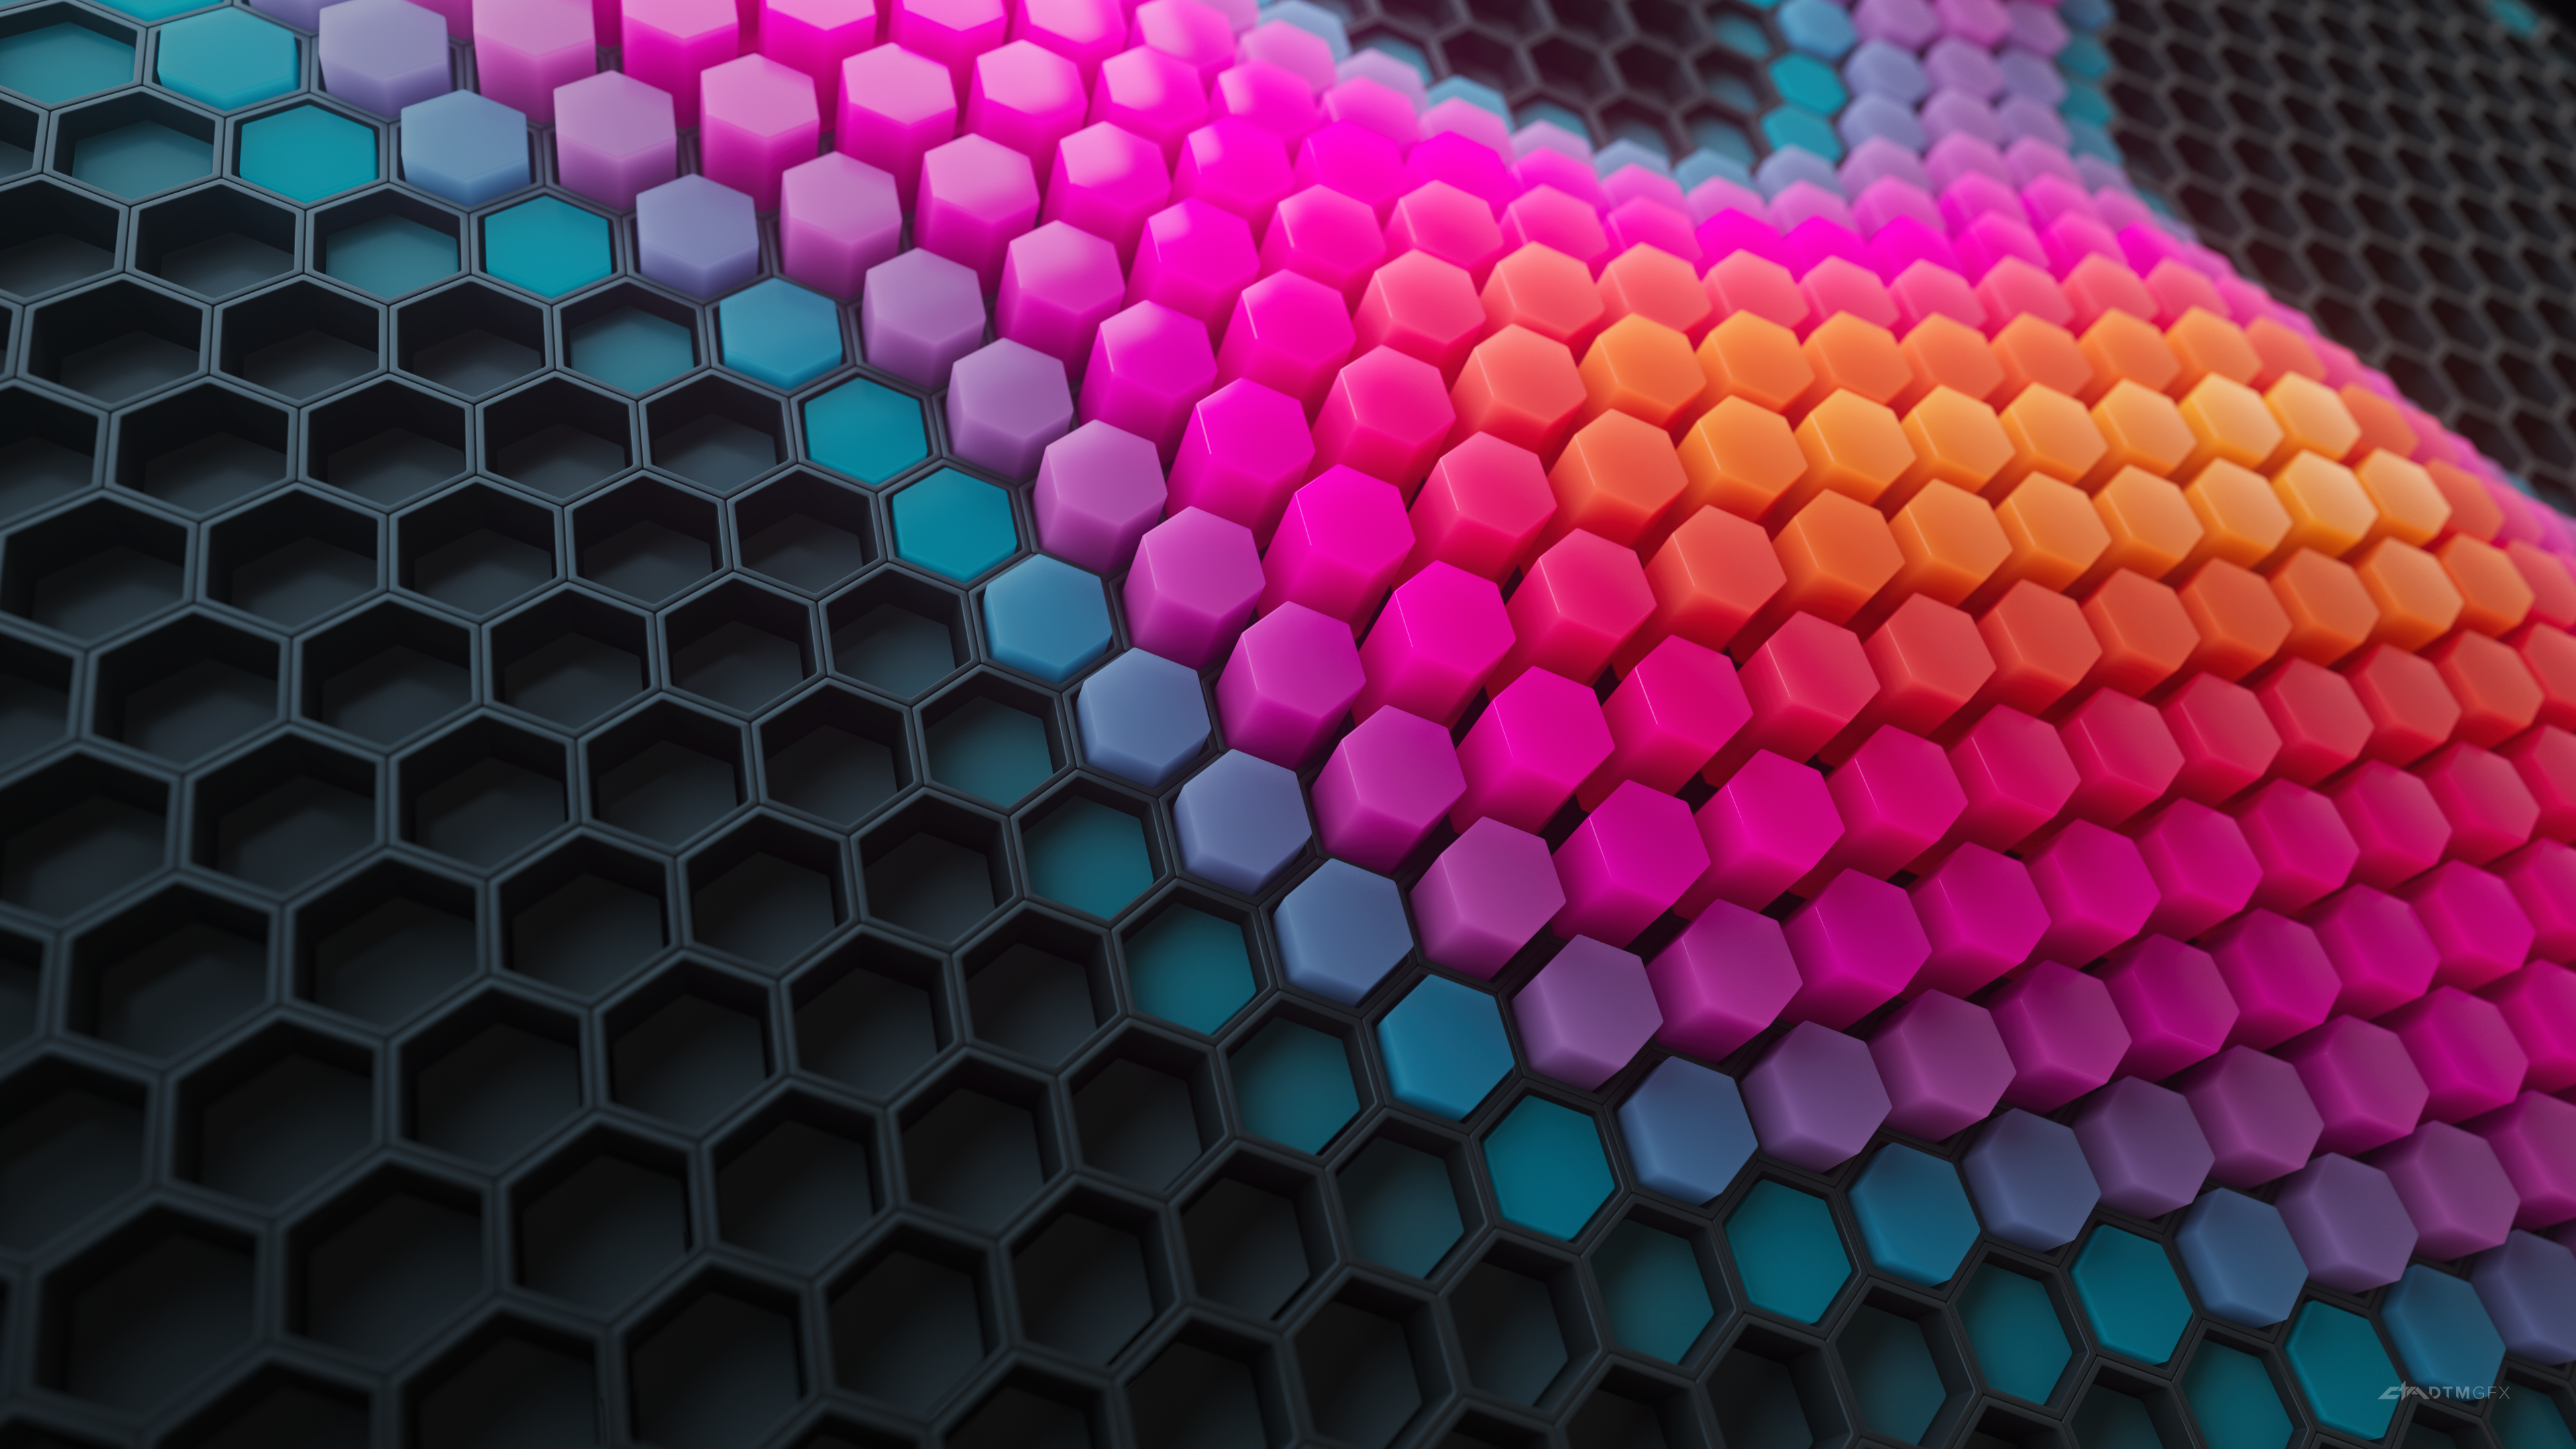 Hexagons Wallpaper 4K, Patterns, Colorful background, Colorful blocks, Abstract